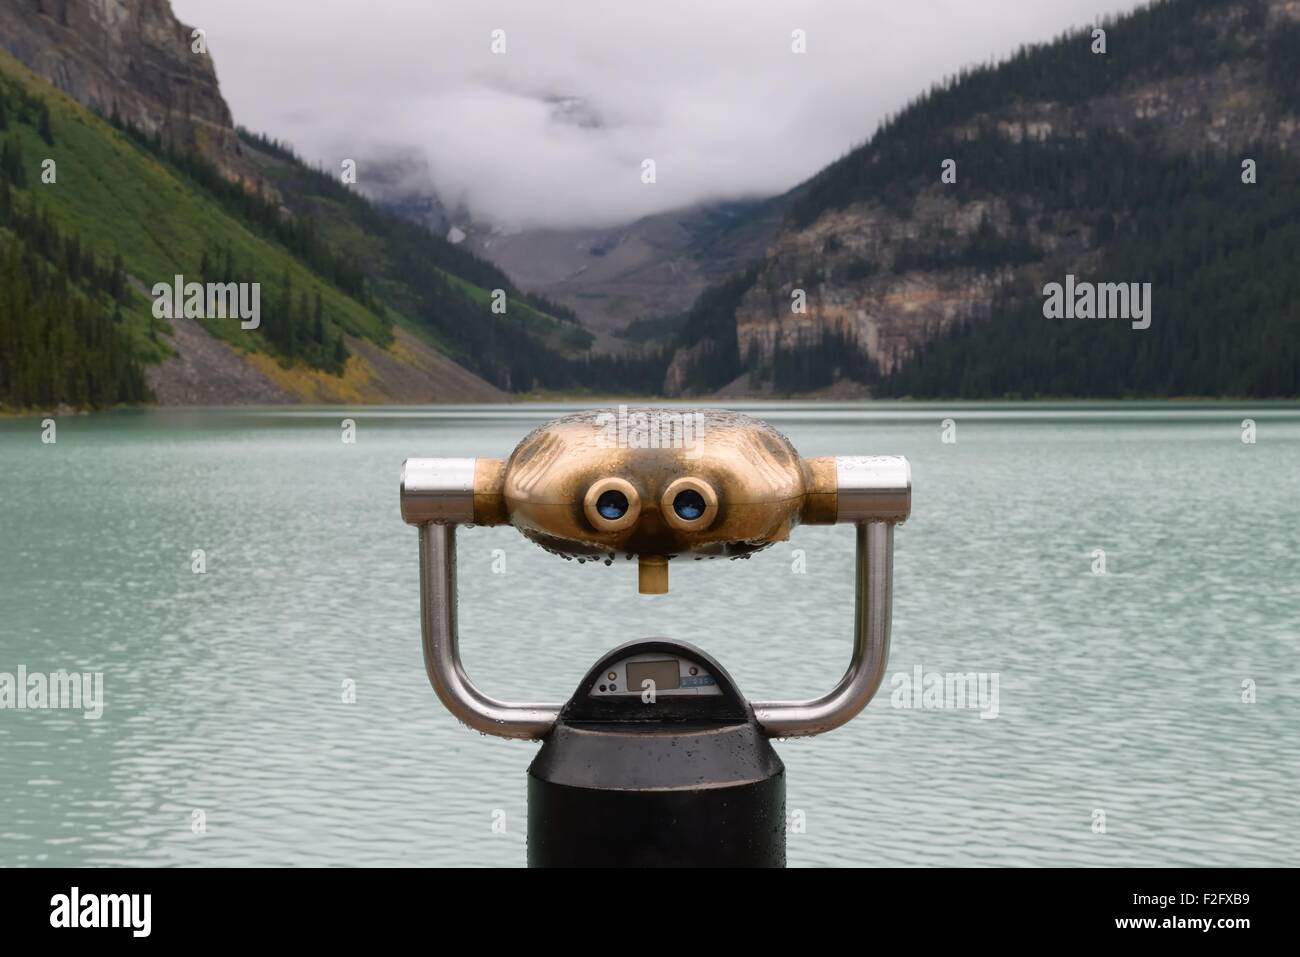 Face-like binoculars close-up overlooking the turquoise water of Lake Louise, Banff, Canada Stock Photo